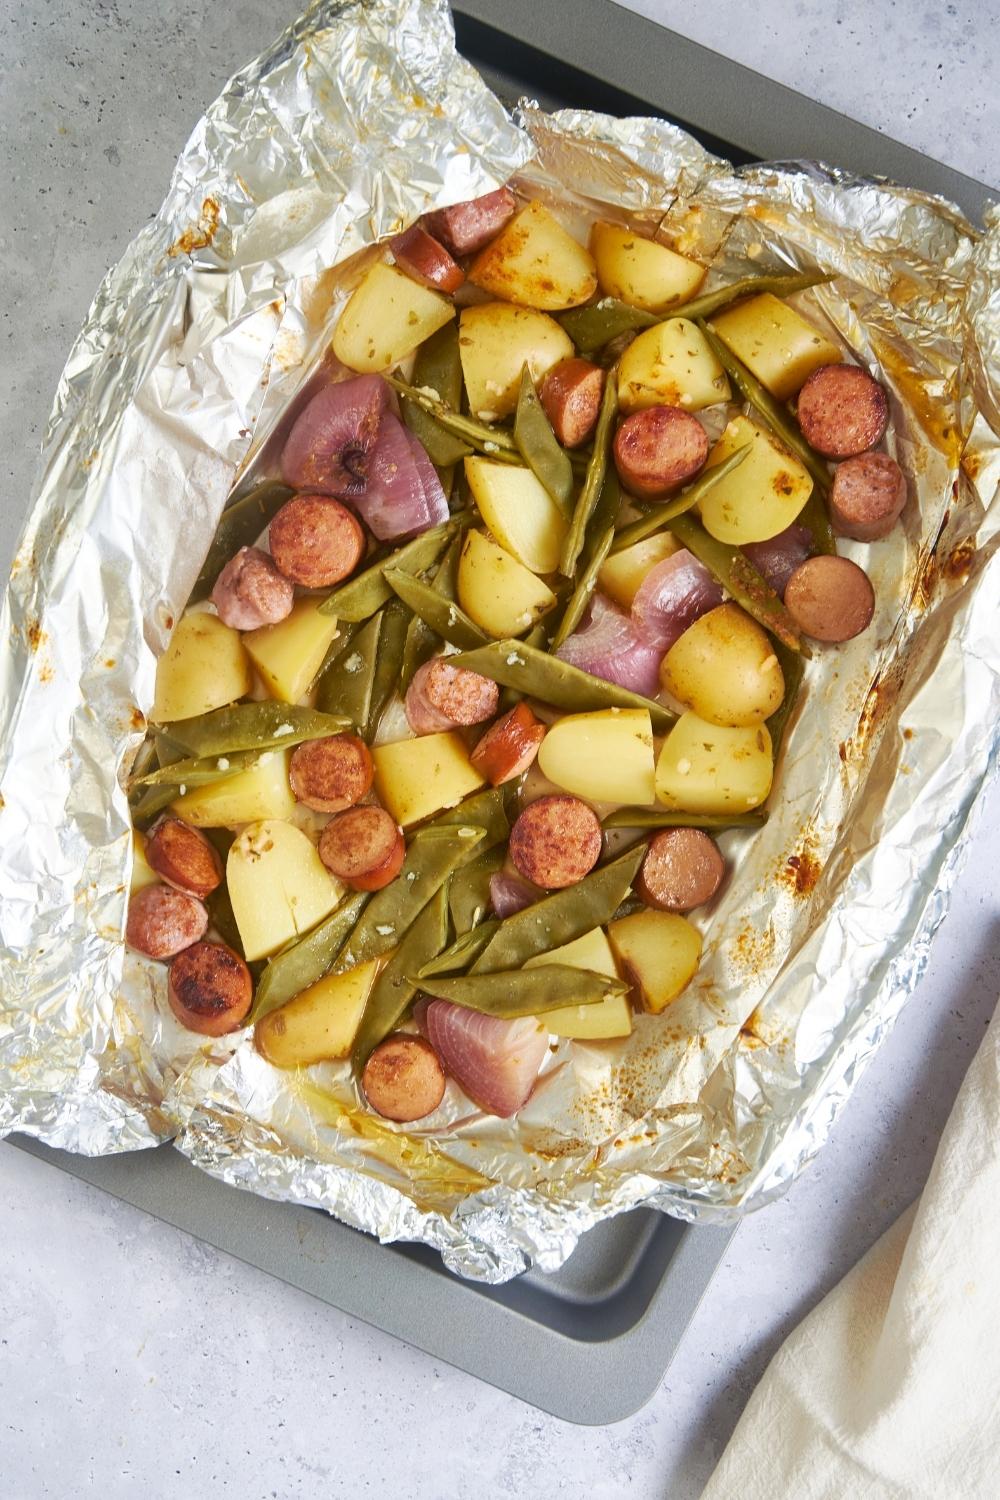 Freshly baked sausage and green bean casserole in a baking dish lined with foil.